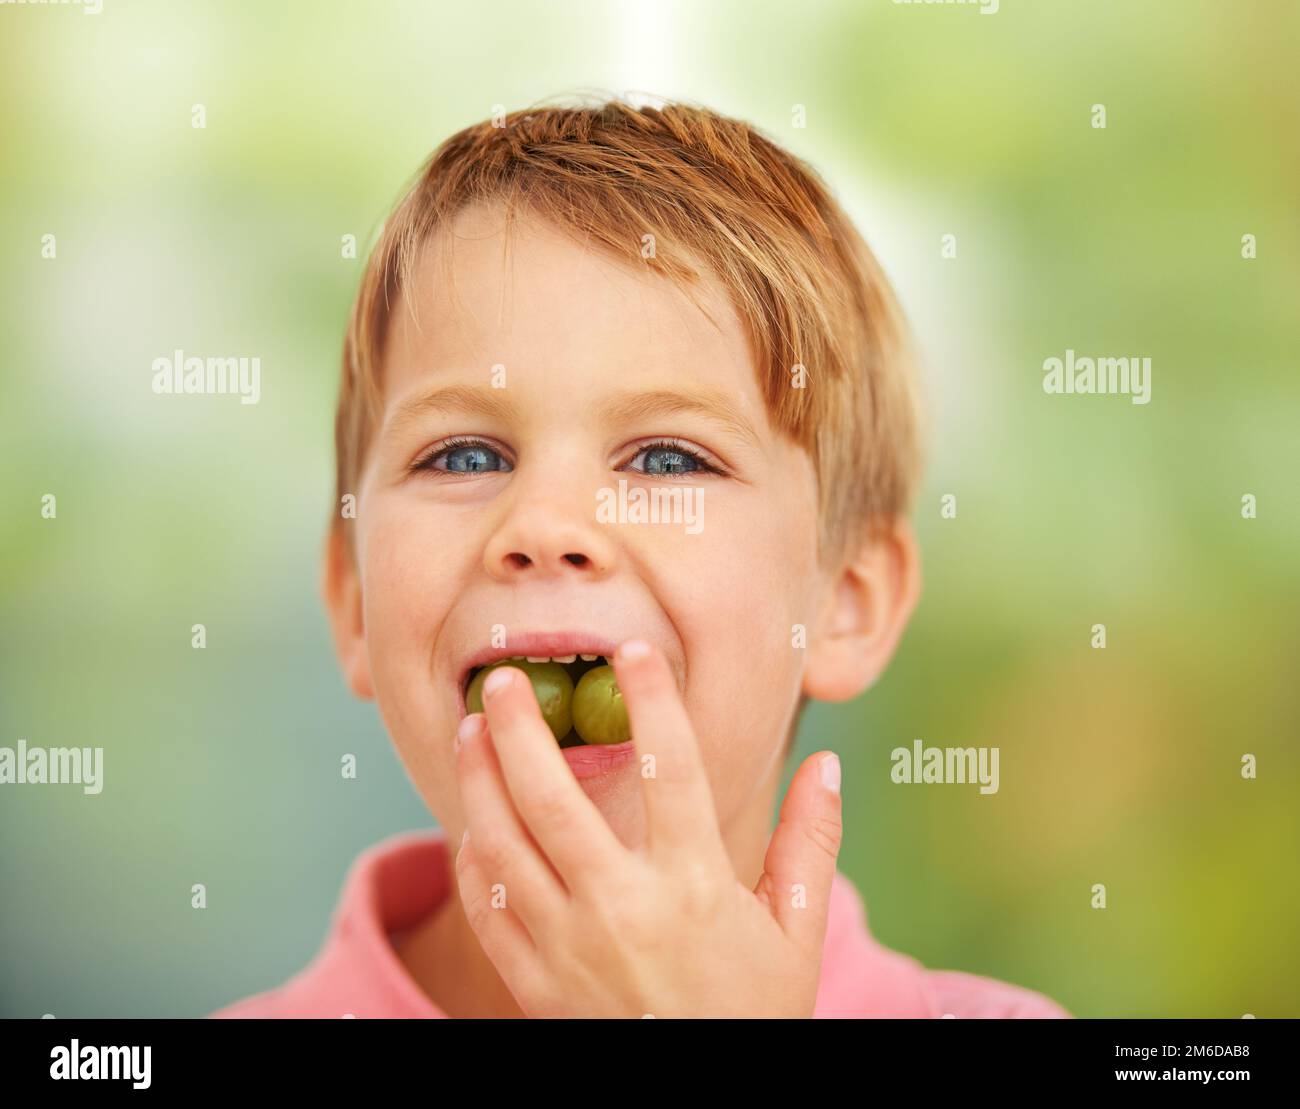 Its a mouthful of fruitiness. a boy stuffing two grapes in his mouth. Stock Photo